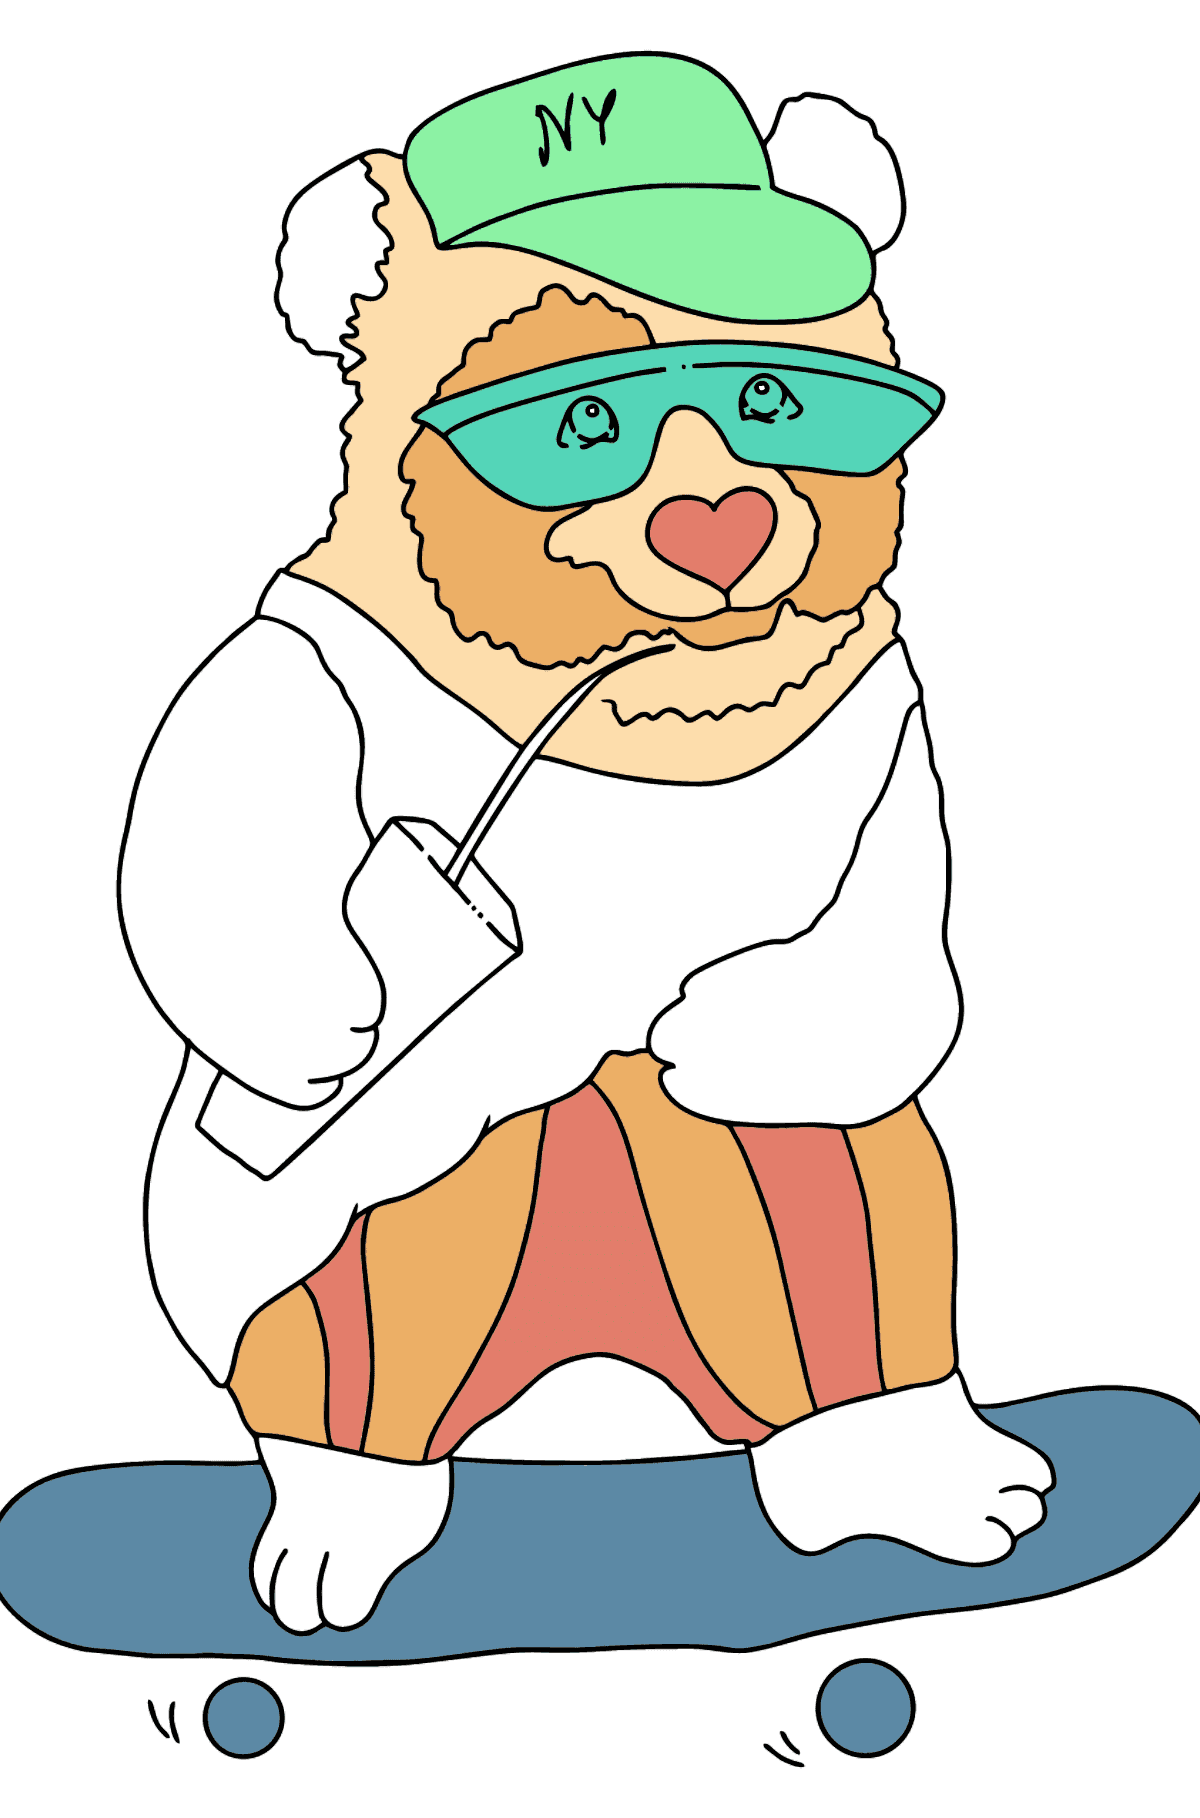 Funny Panda coloring page - Coloring Pages for Kids